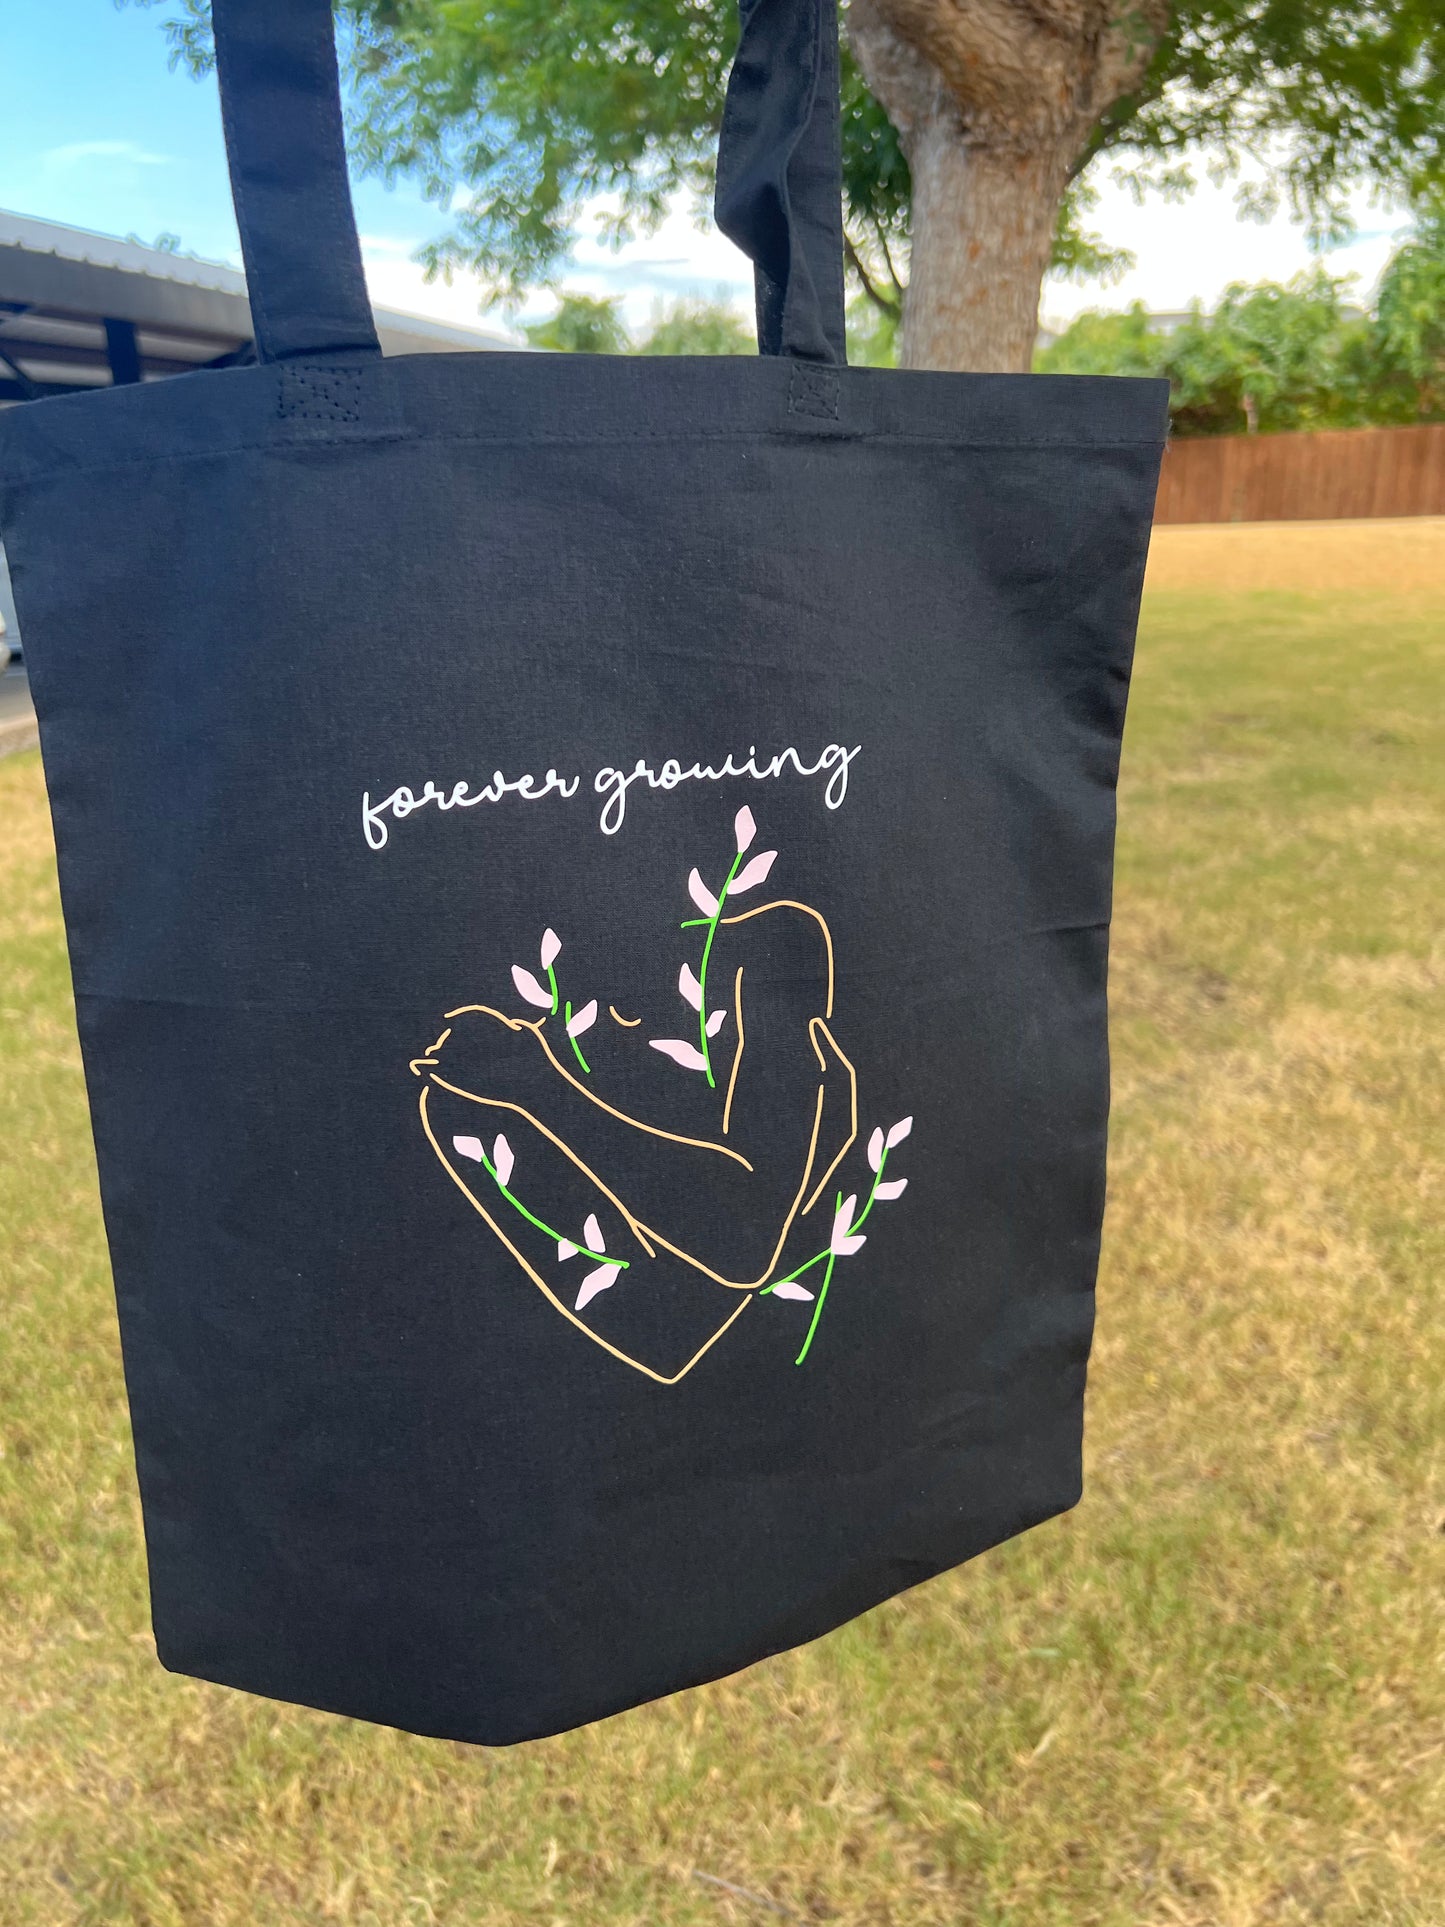 personal growth tote